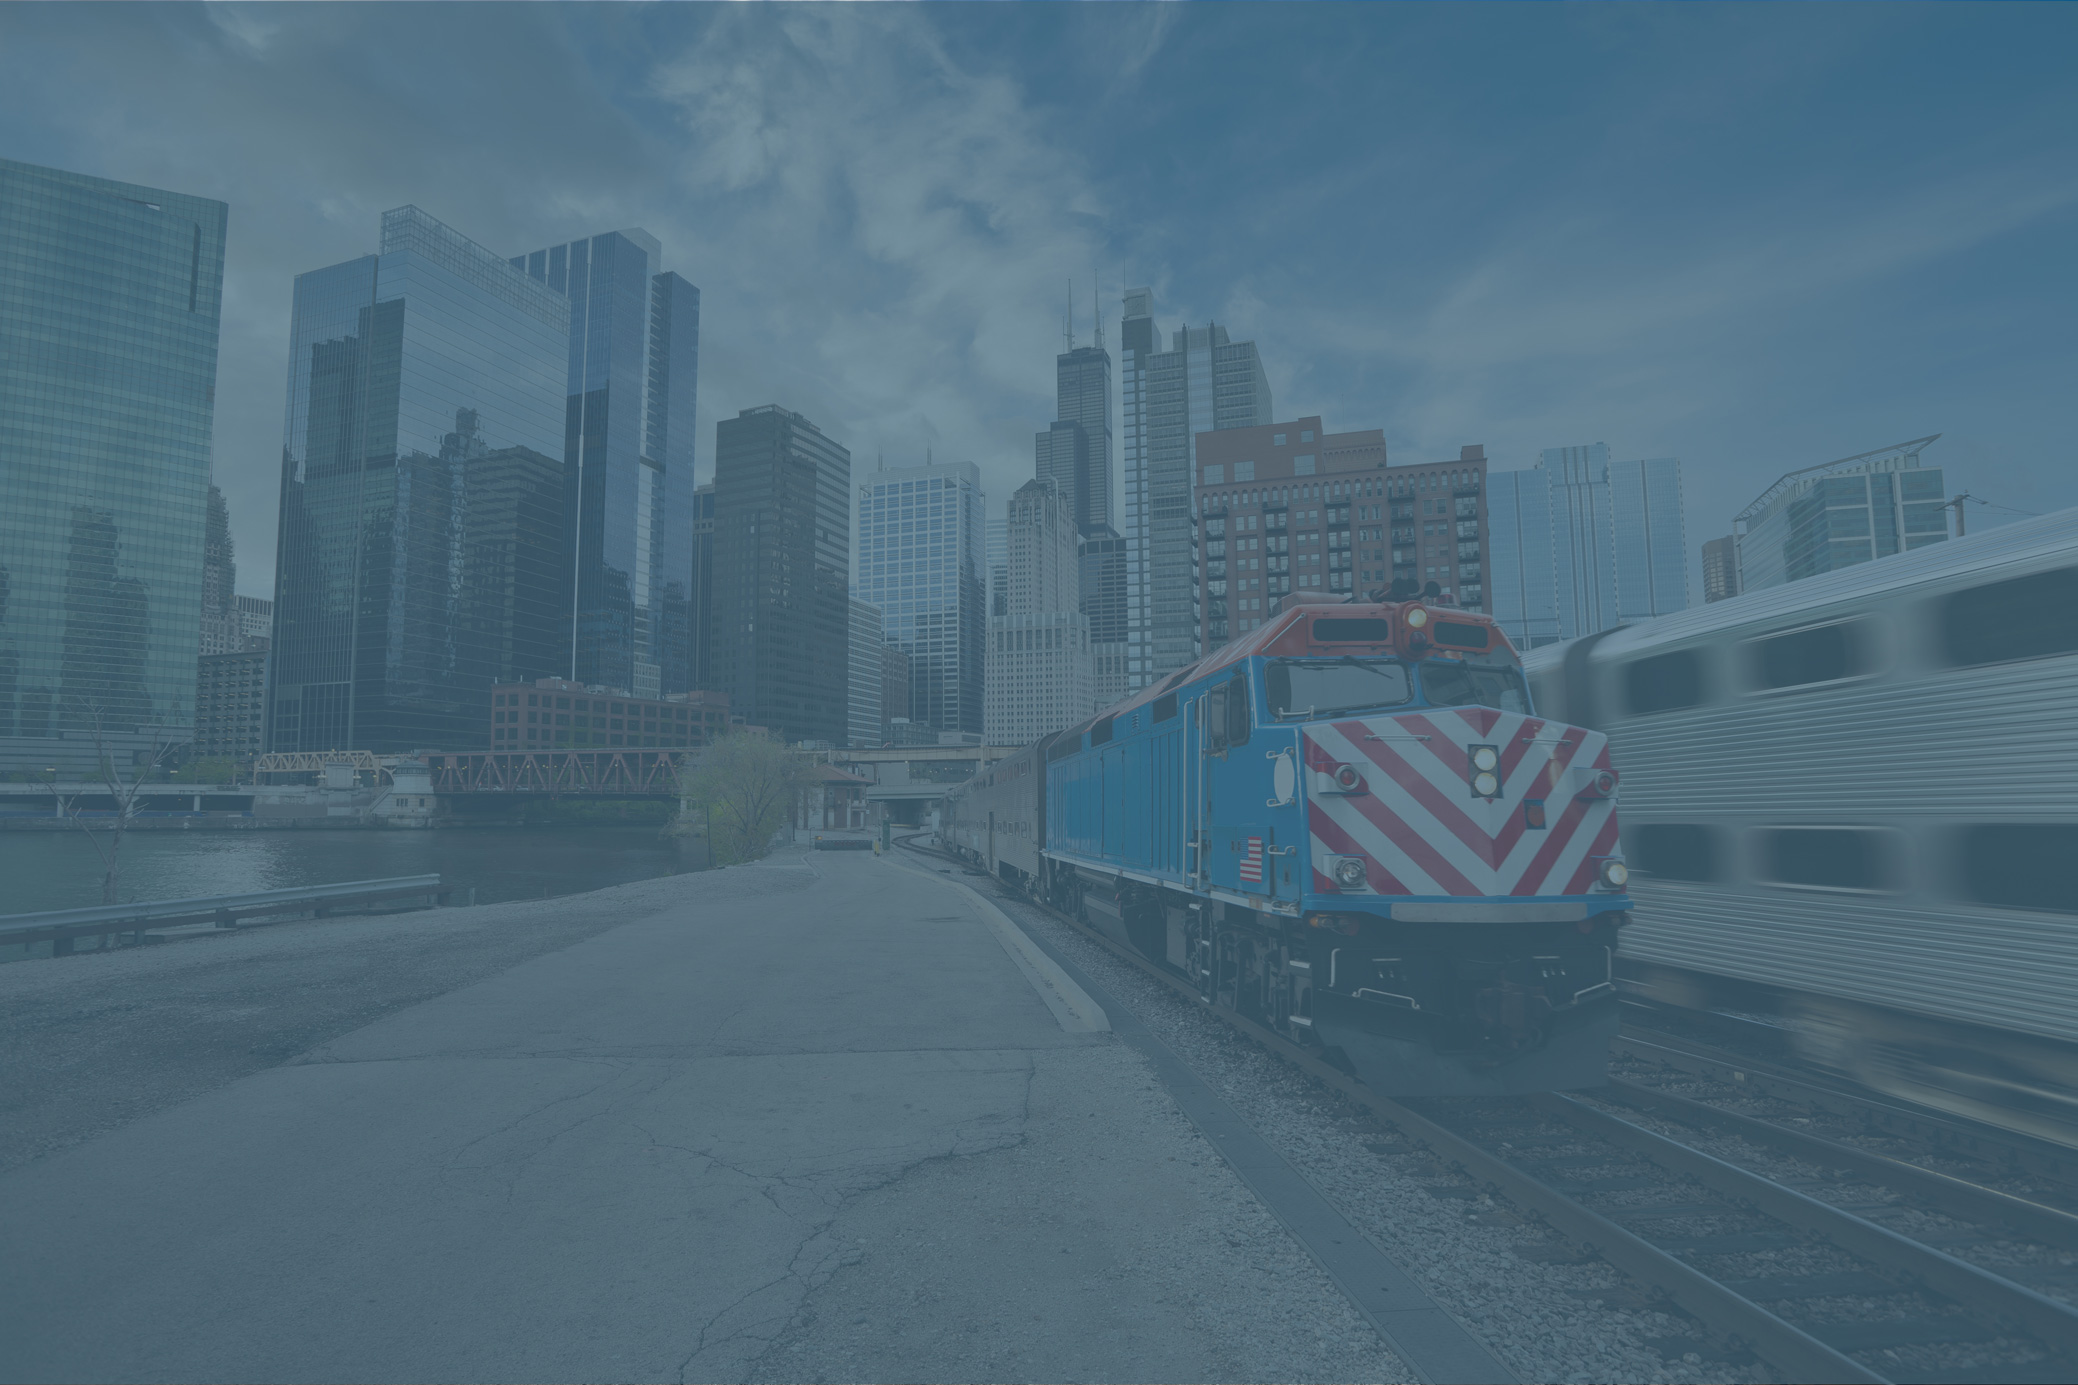 Chicago Metra train with red, white and blue locomotive, downtown district in background